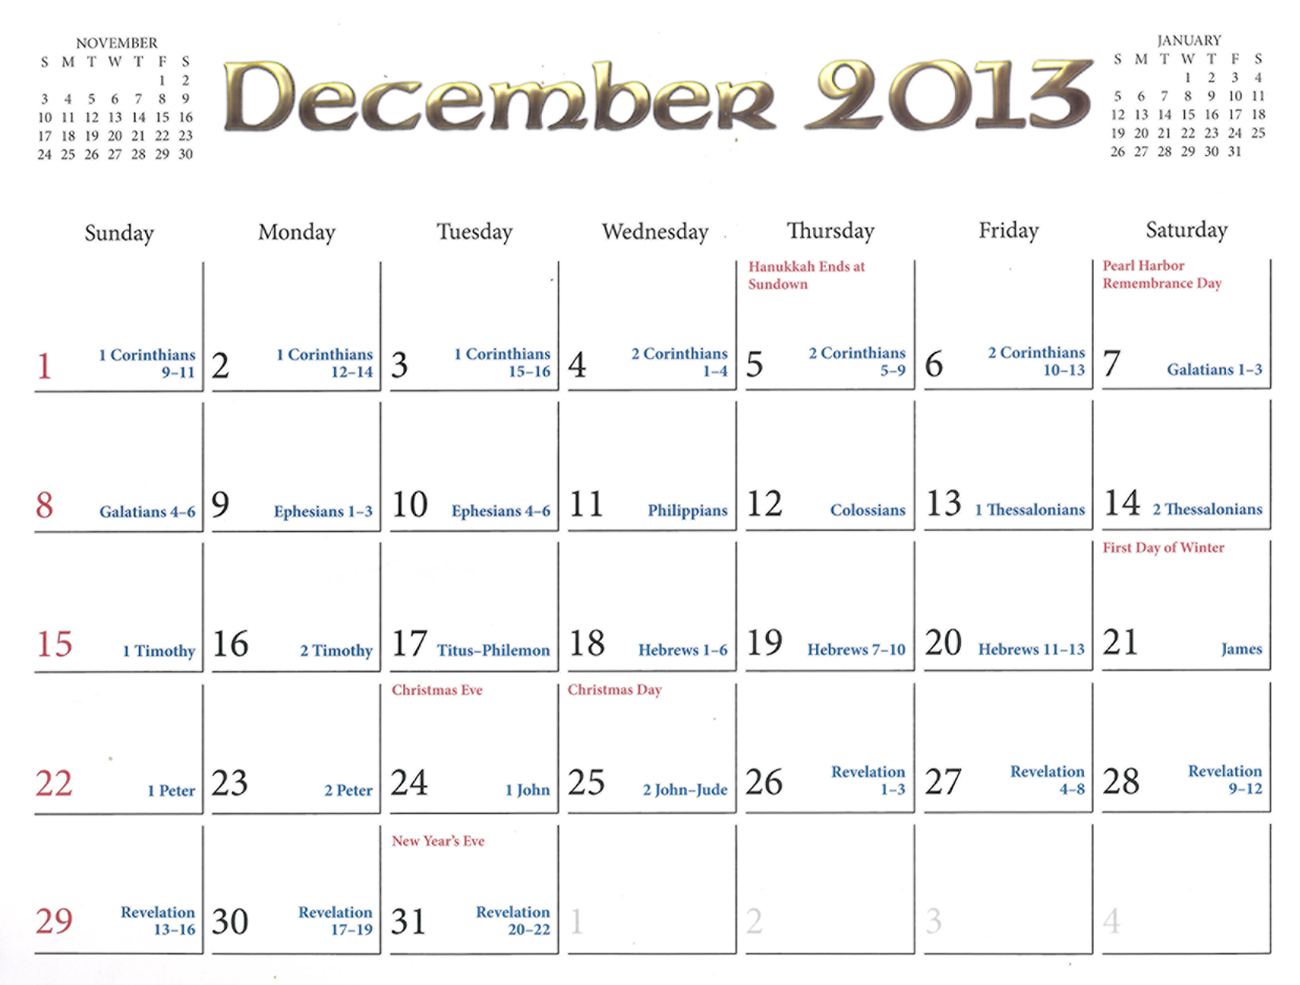 2013 Prophecy Calendar: December - What Jesus Will Do When He Comes Again